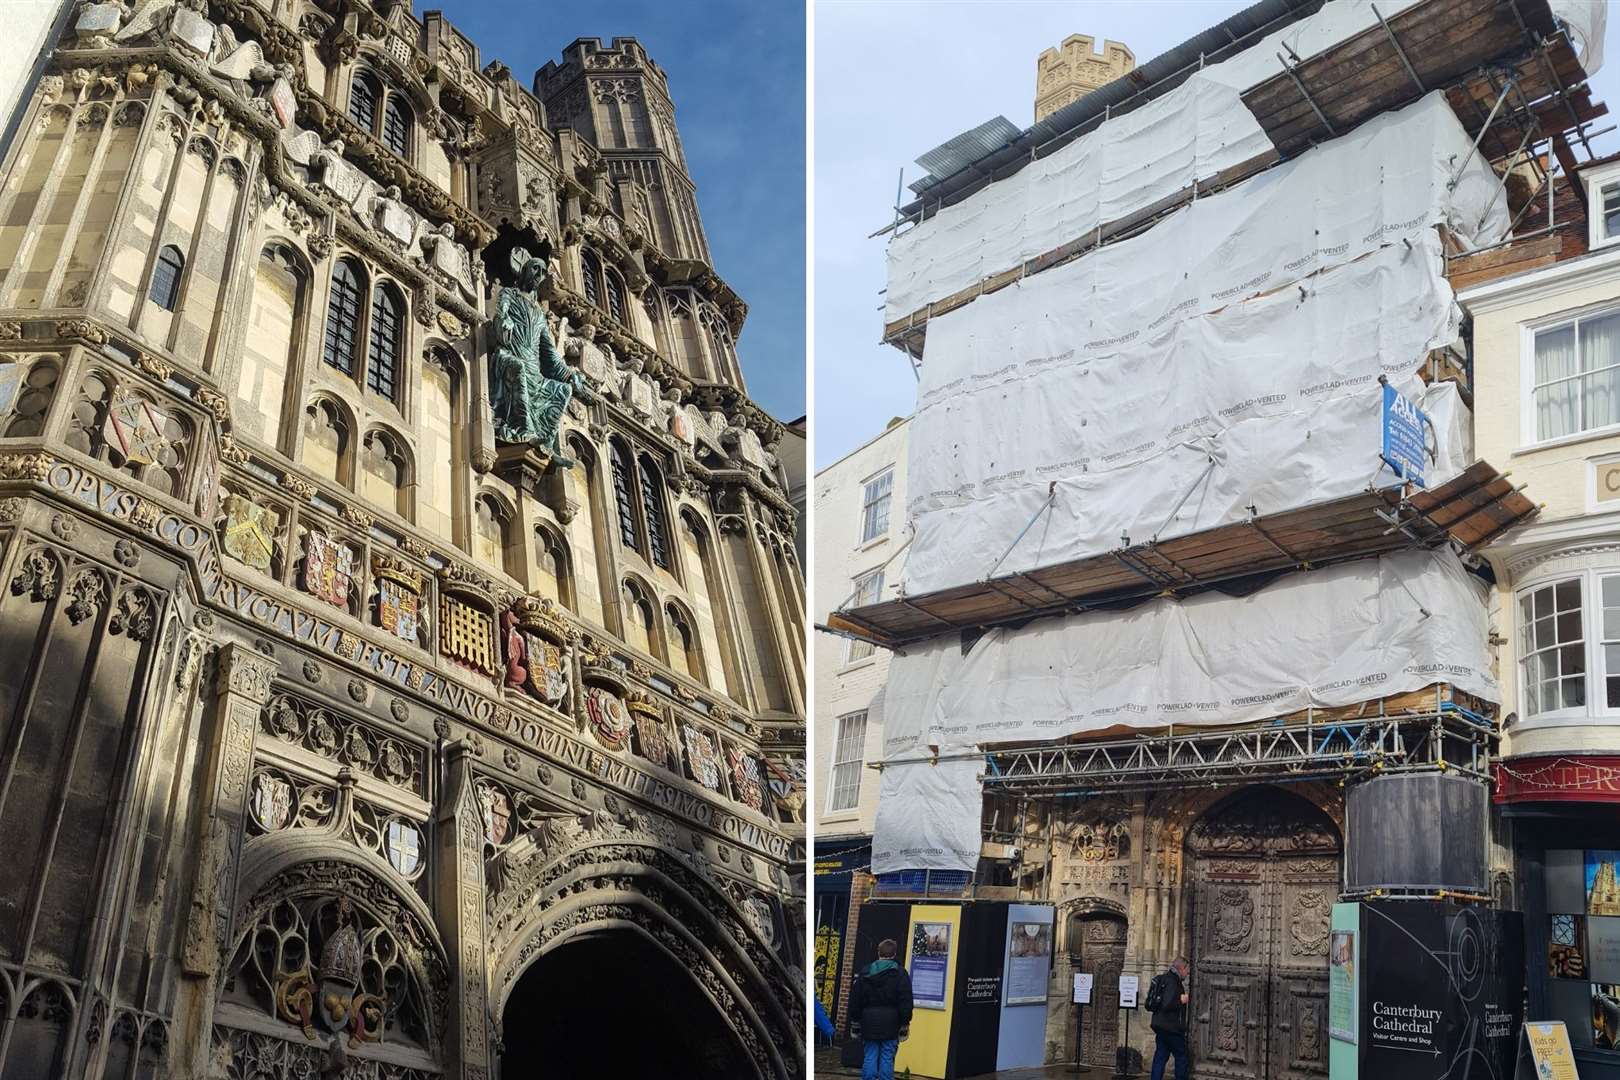 The entrance before the restoration, and covered in scaffolding during the work